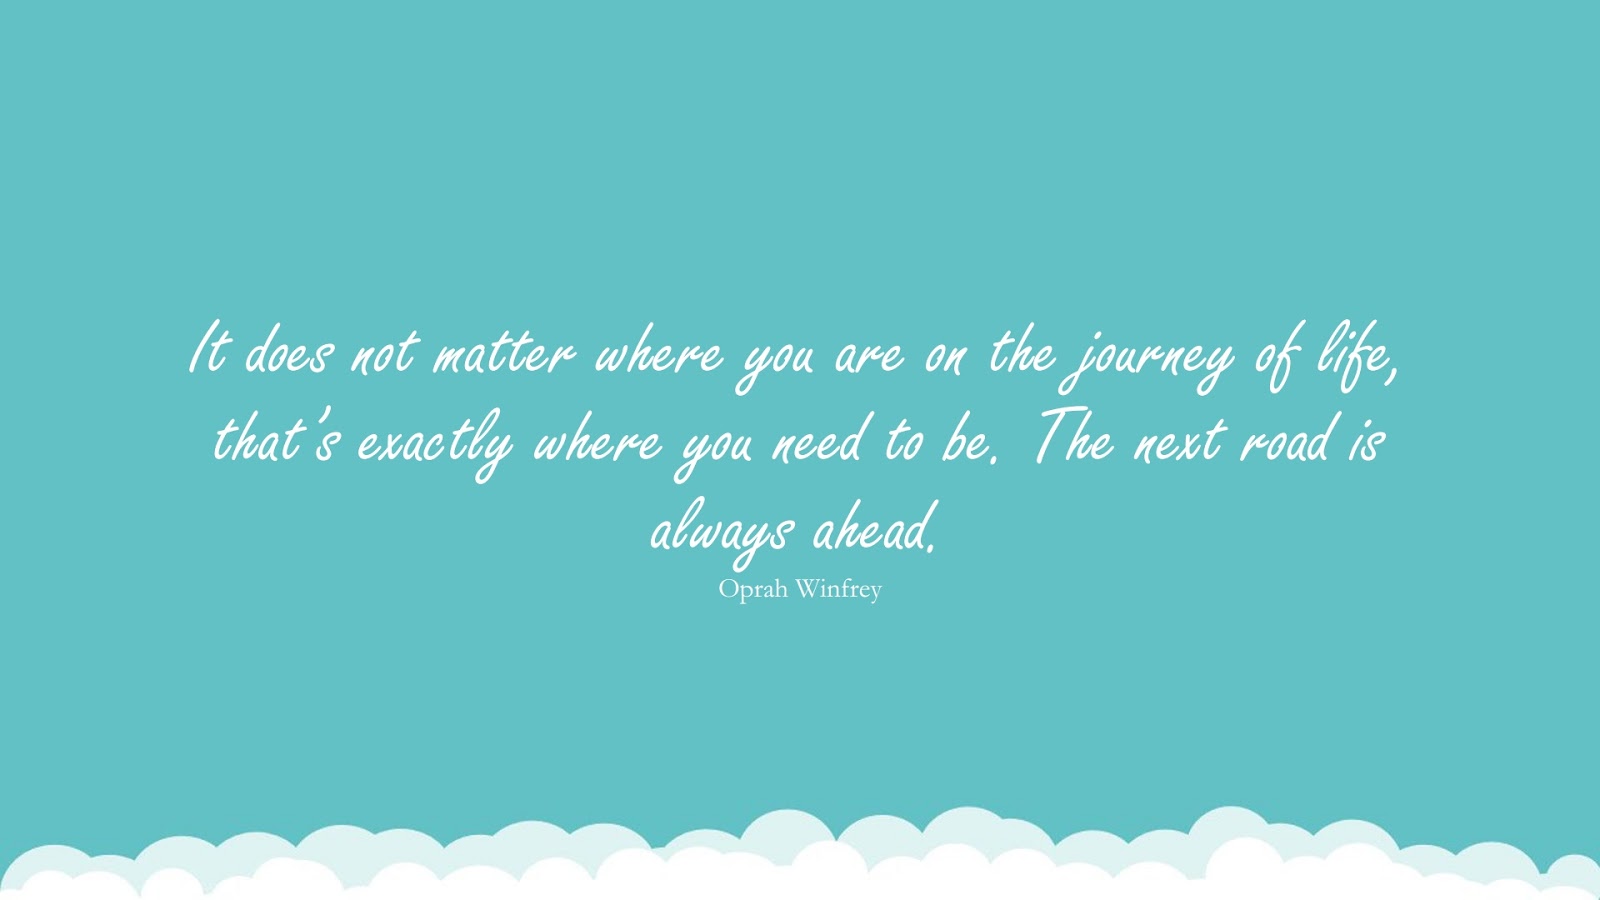 It does not matter where you are on the journey of life, that’s exactly where you need to be. The next road is always ahead. (Oprah Winfrey);  #MotivationalQuotes